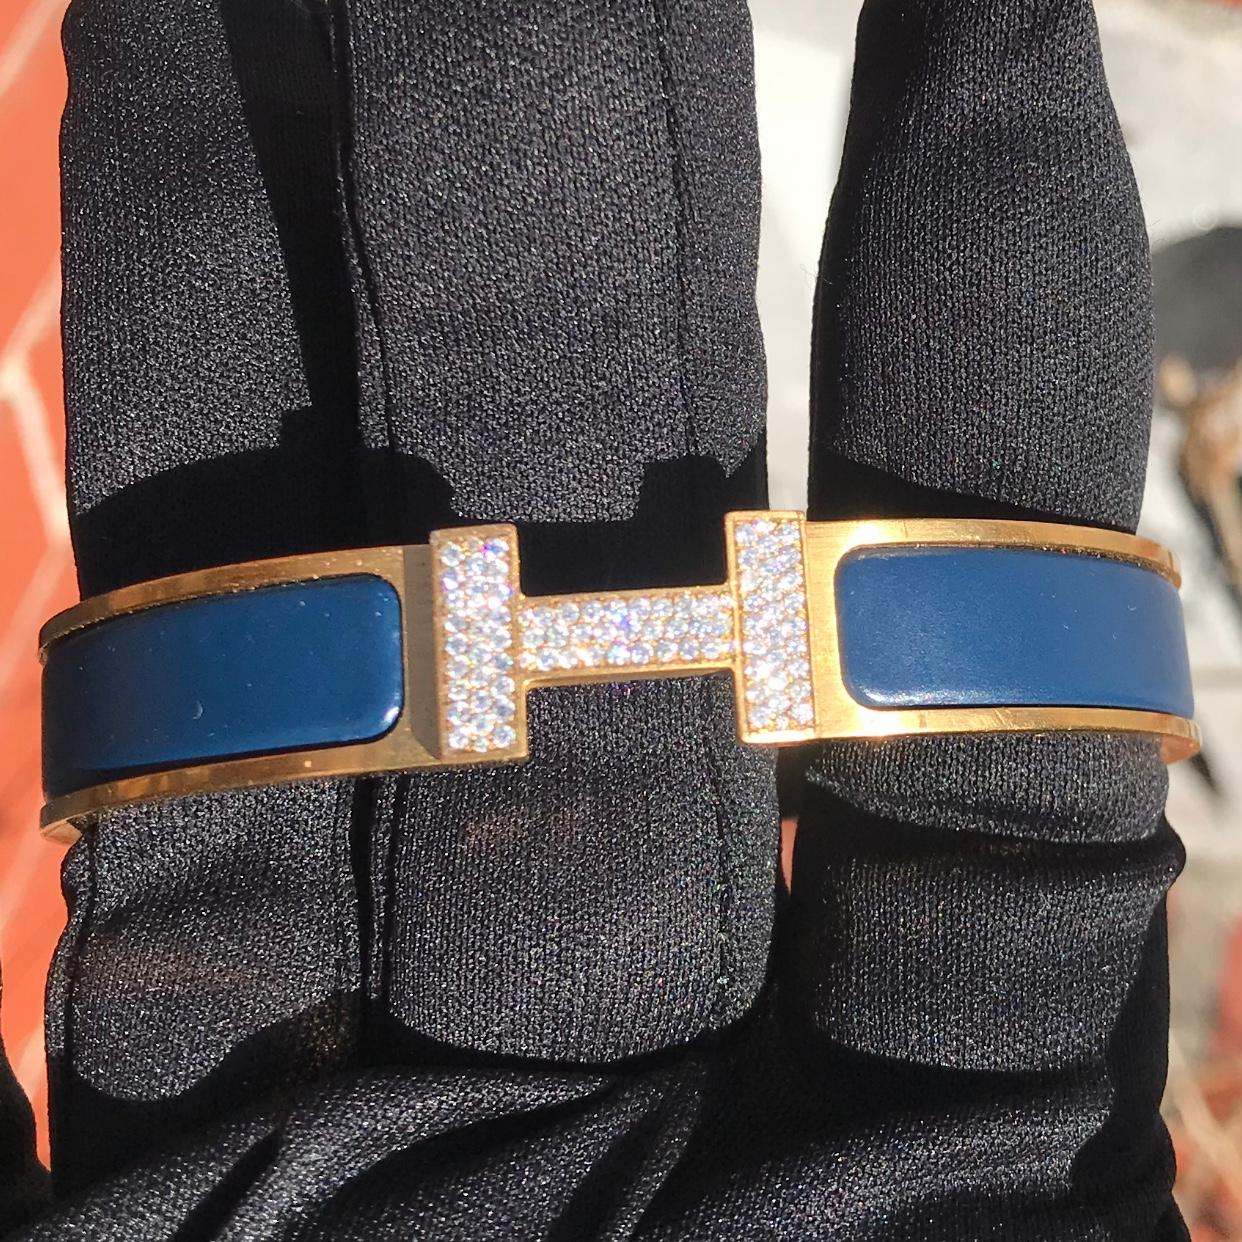 Custom Diamond Hermes Clic H Bracelet complete with original box.

An original Hermes Clic H bracelet GM size in blue and gold color is customized hand-set with approx. 1.25 carats of natural genuine earth-mined VS-SI Diamonds. The diamonds shine